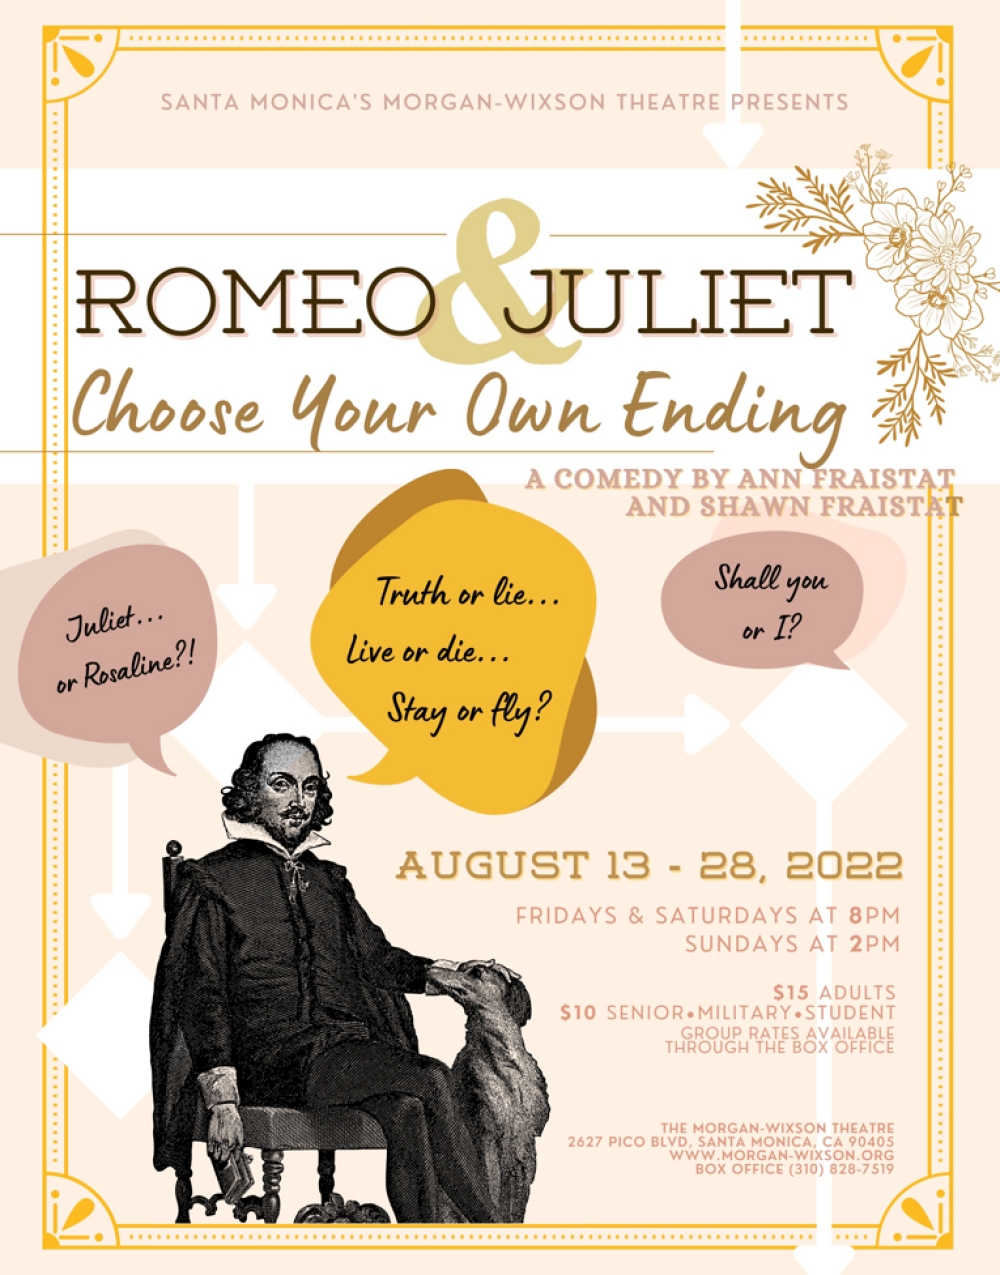 Romeo & Juliet: Choose Your Own Ending at Morgan-Wixson Theatre